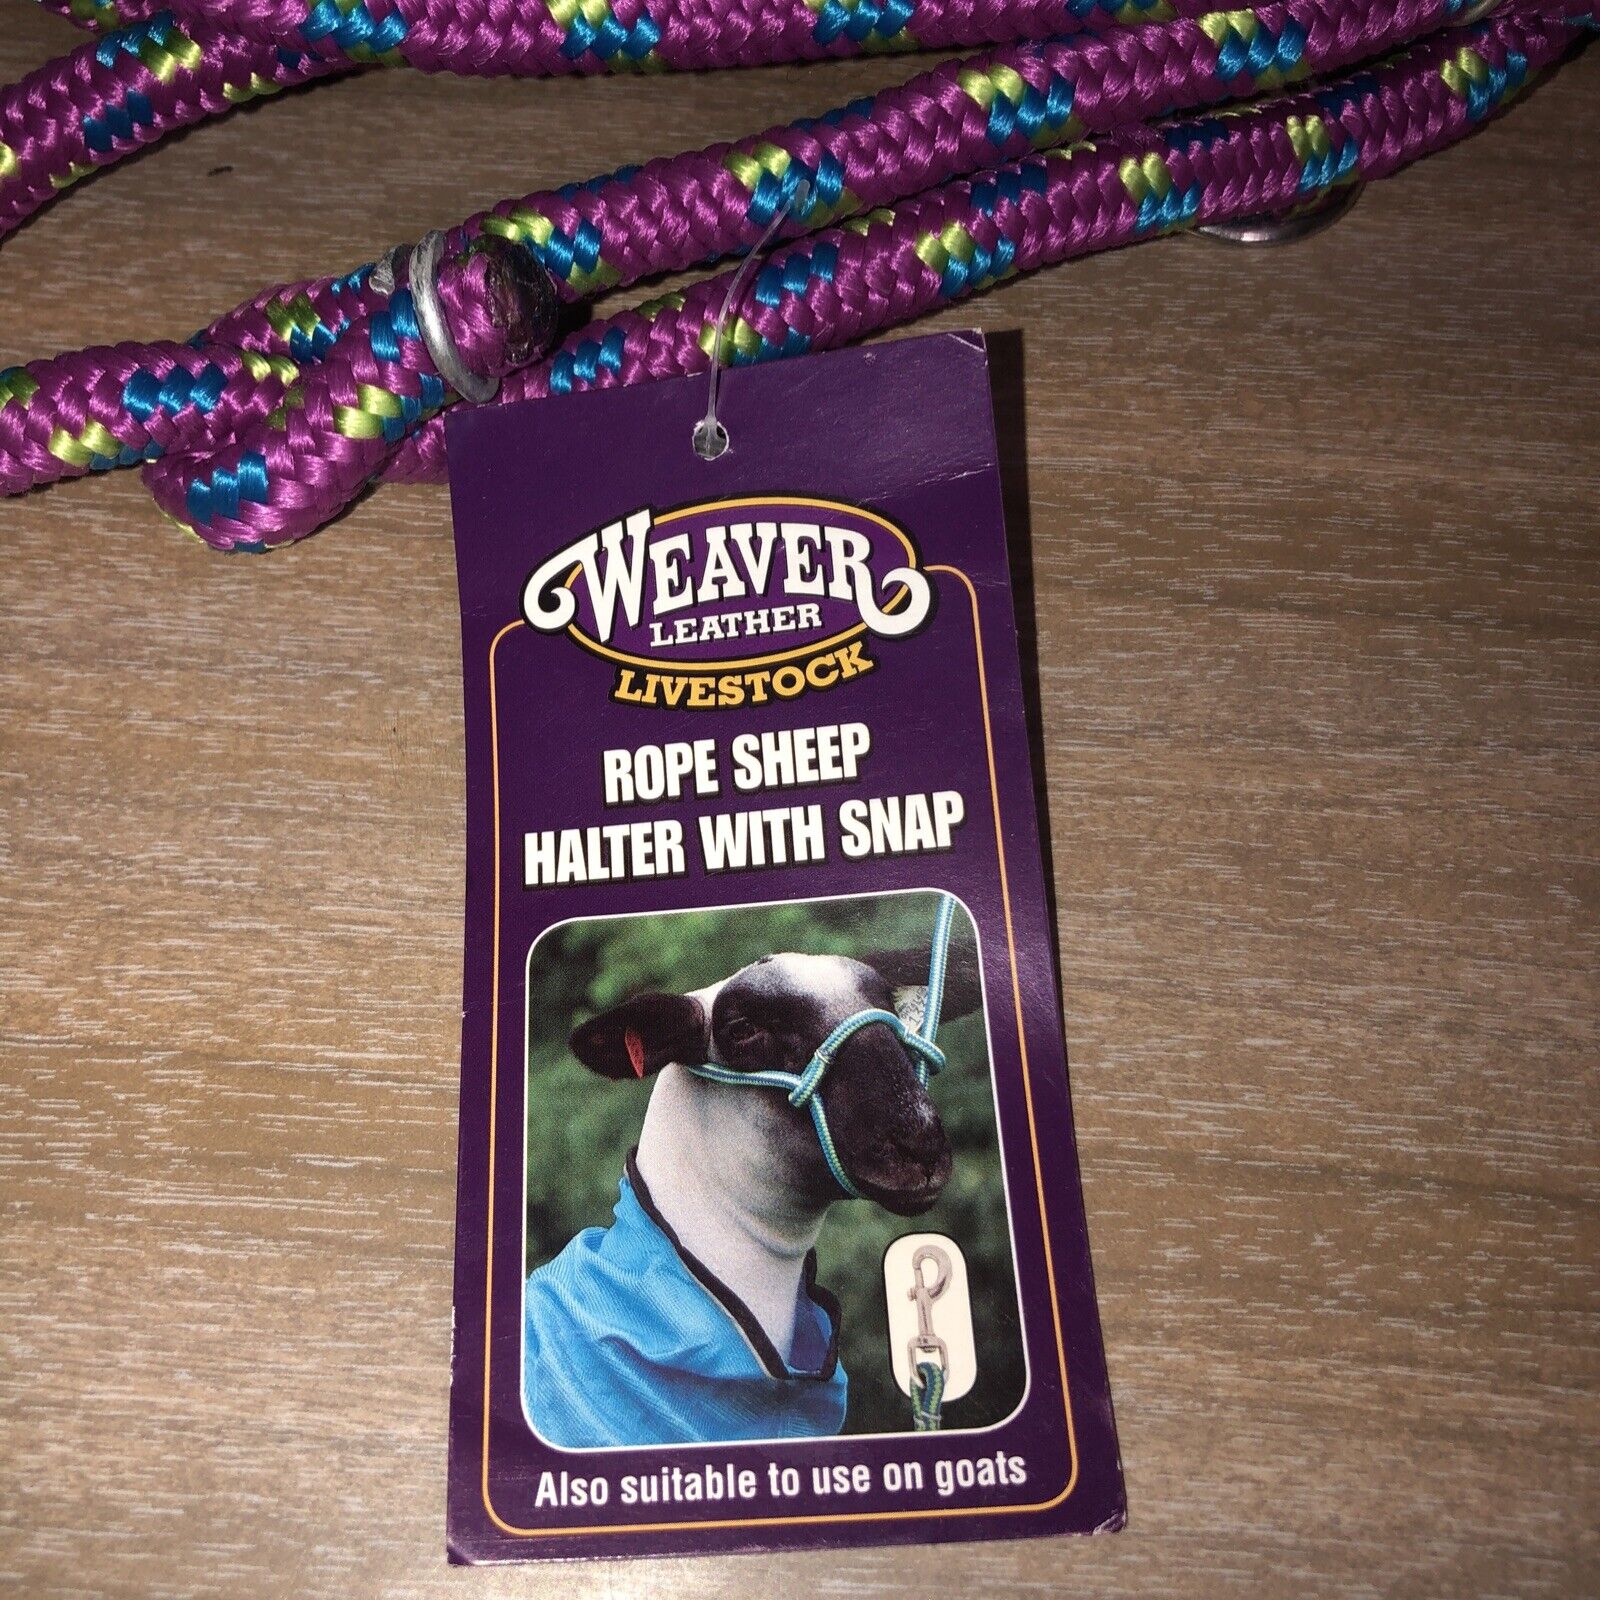 Weaver Leather Livestock Rope Sheep Halter With Snap